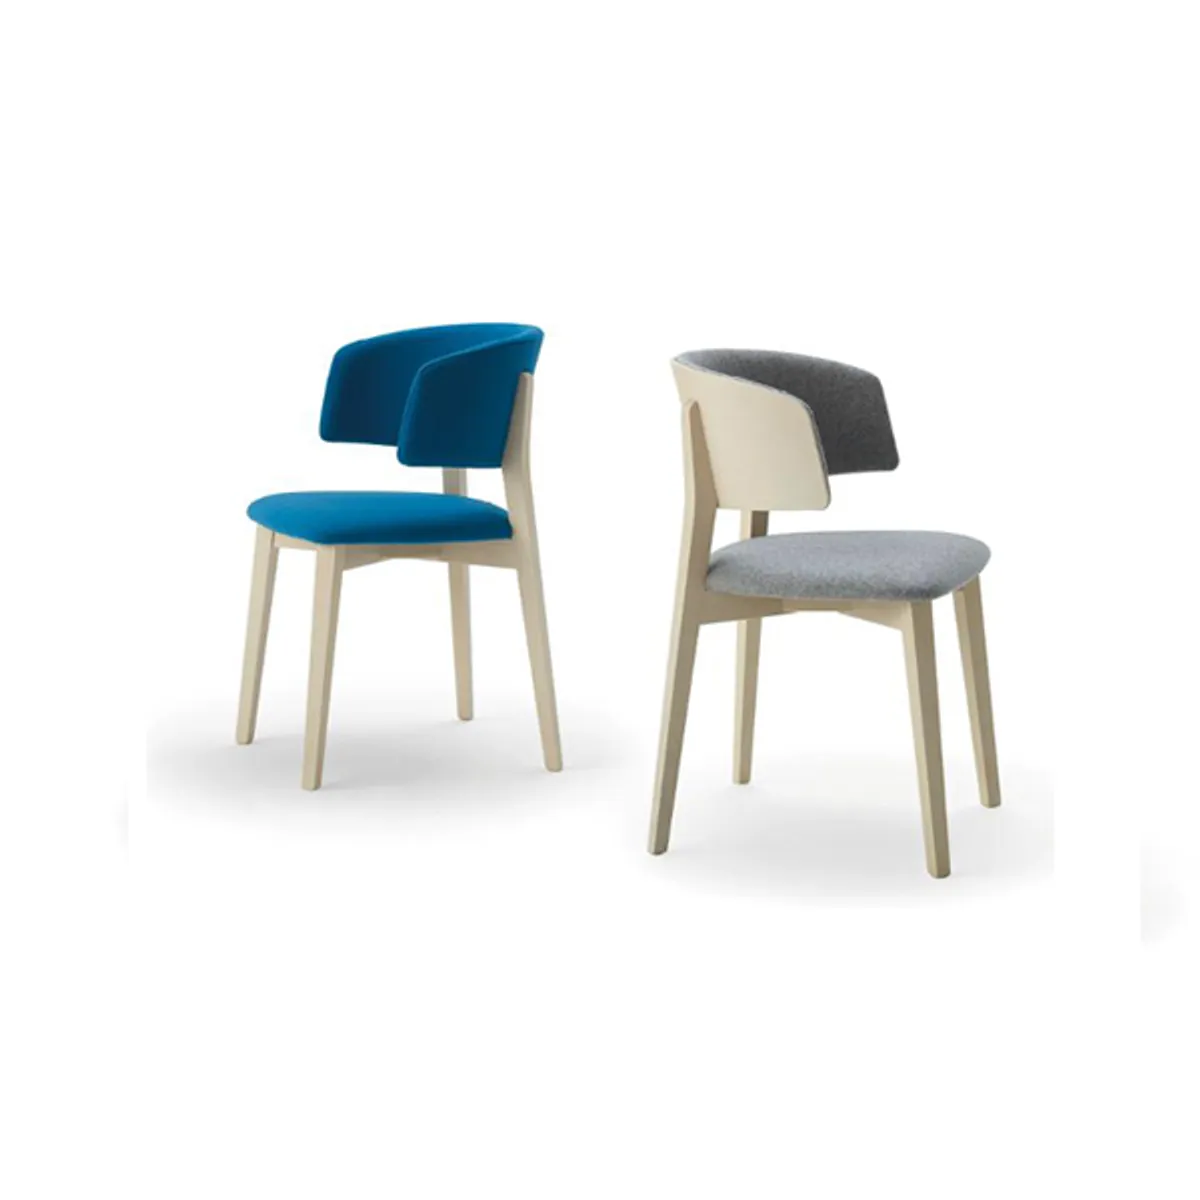 Macaronsidechair Inside Out Contracts2